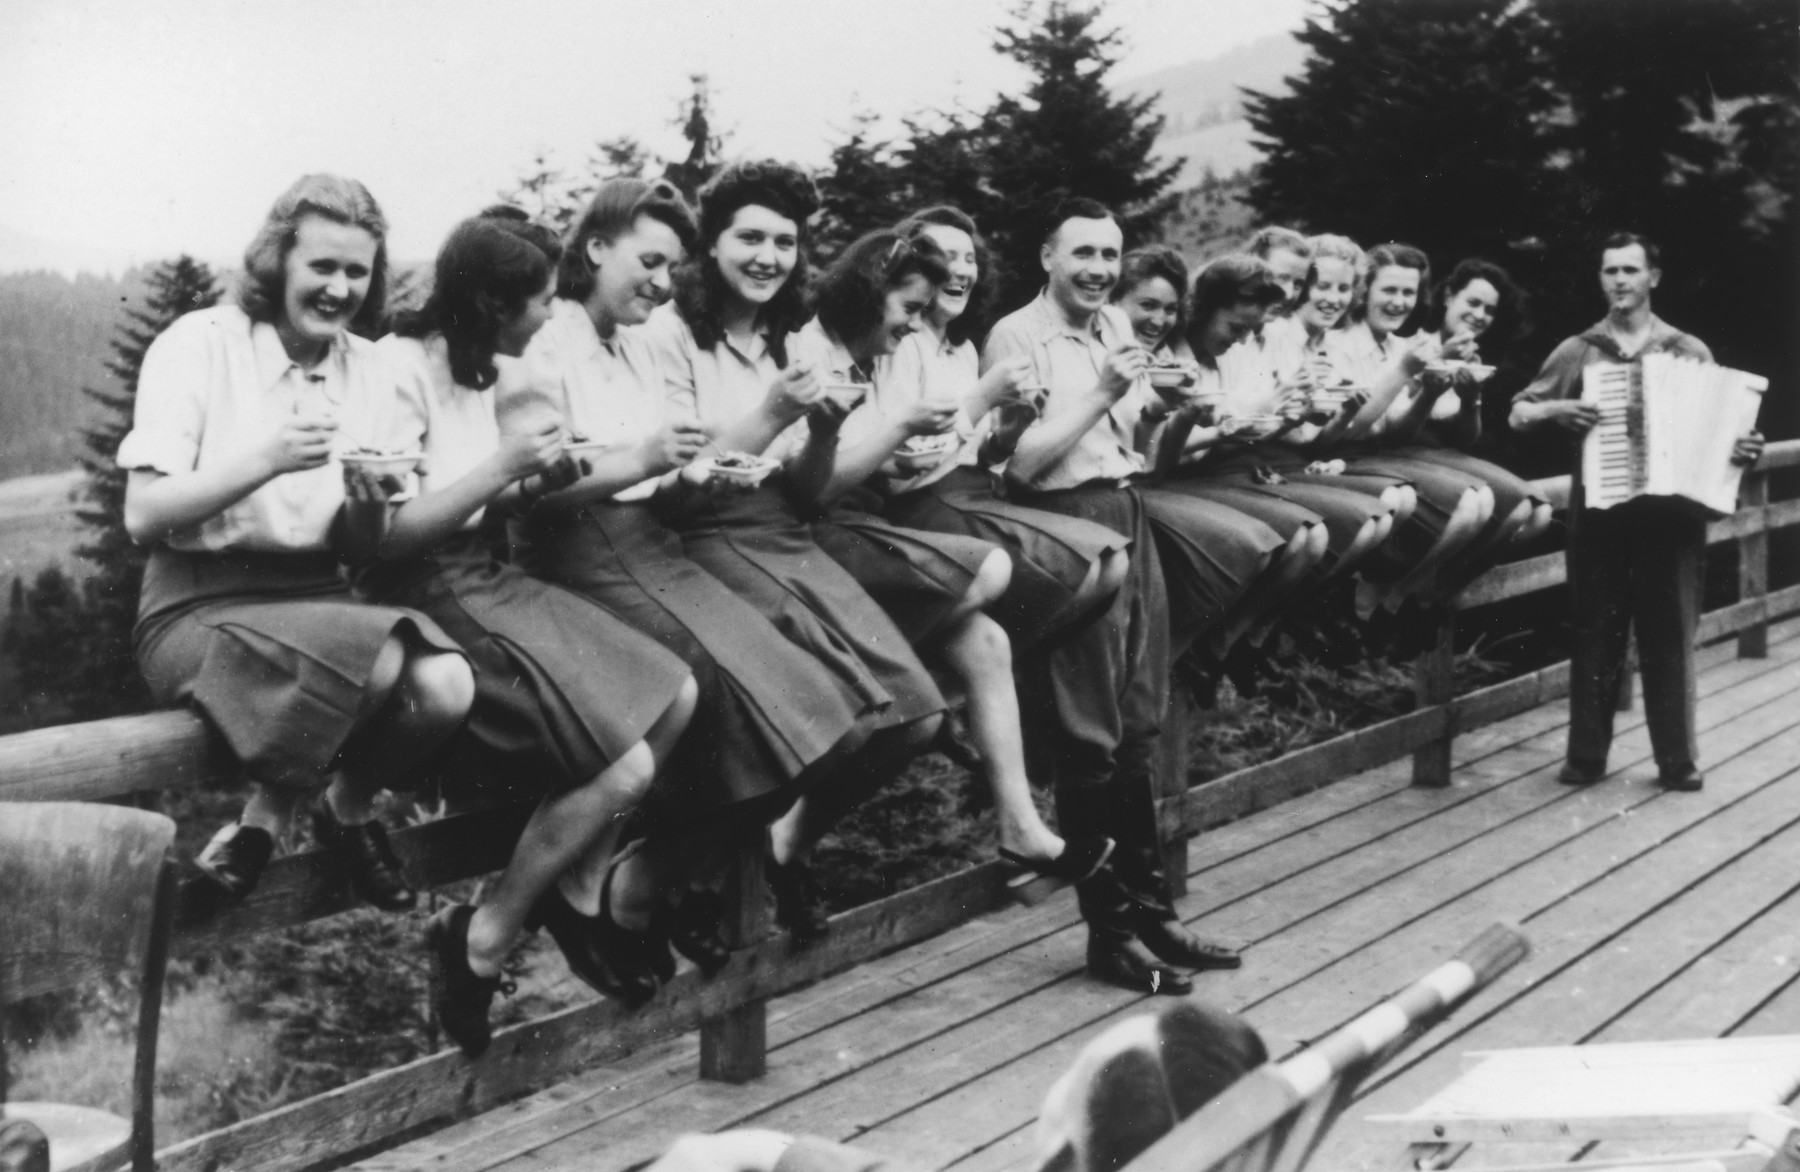 Members of the SS Helferinnen (female auxiliaries) and SS officer Karl Hoecker sit on a fence railing in Solahuette eating bowls of blueberries.  In the background is a man playing the accordion. 

The original caption reads "Hier gibt es Blaubeeren" (there are blueberries here).